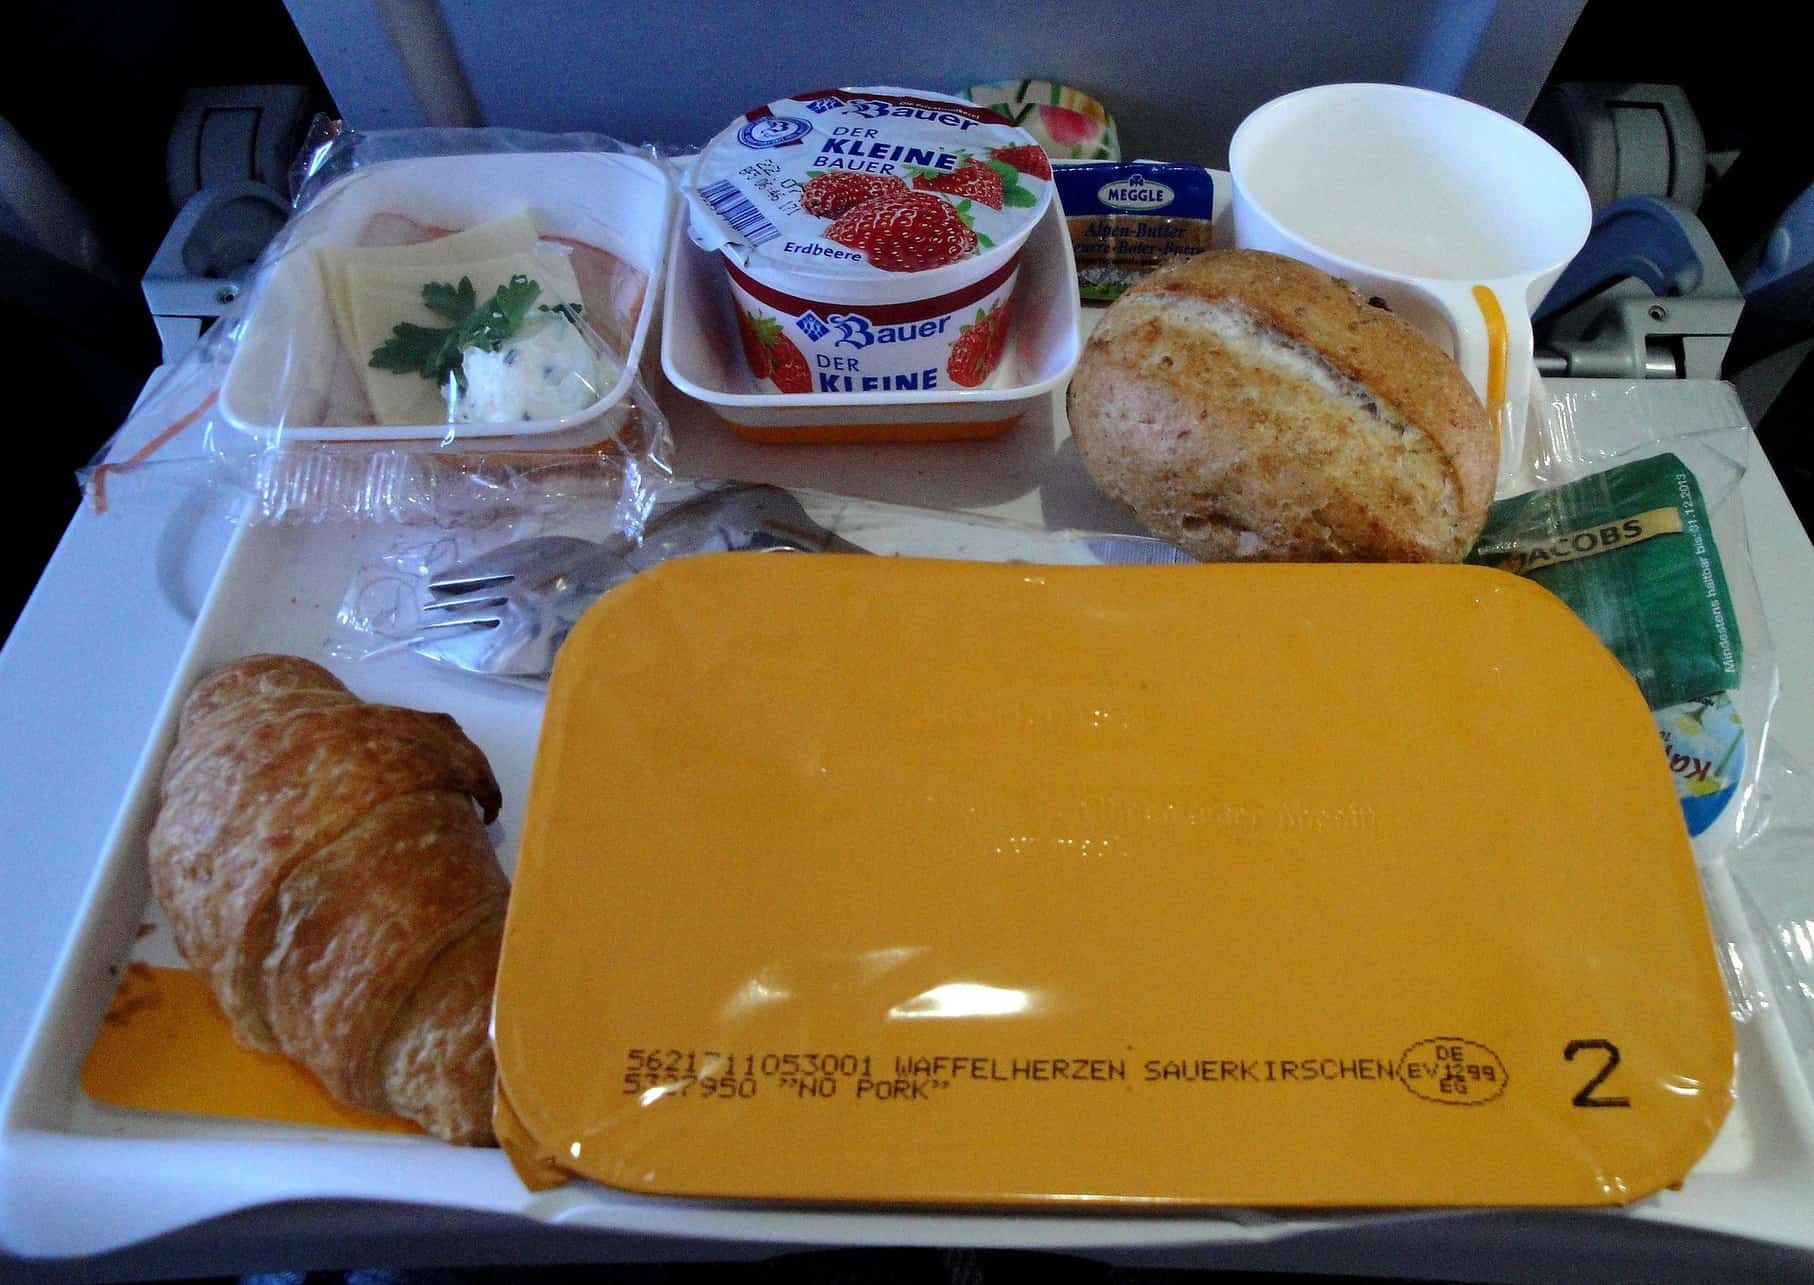 Breakfast in the airplane